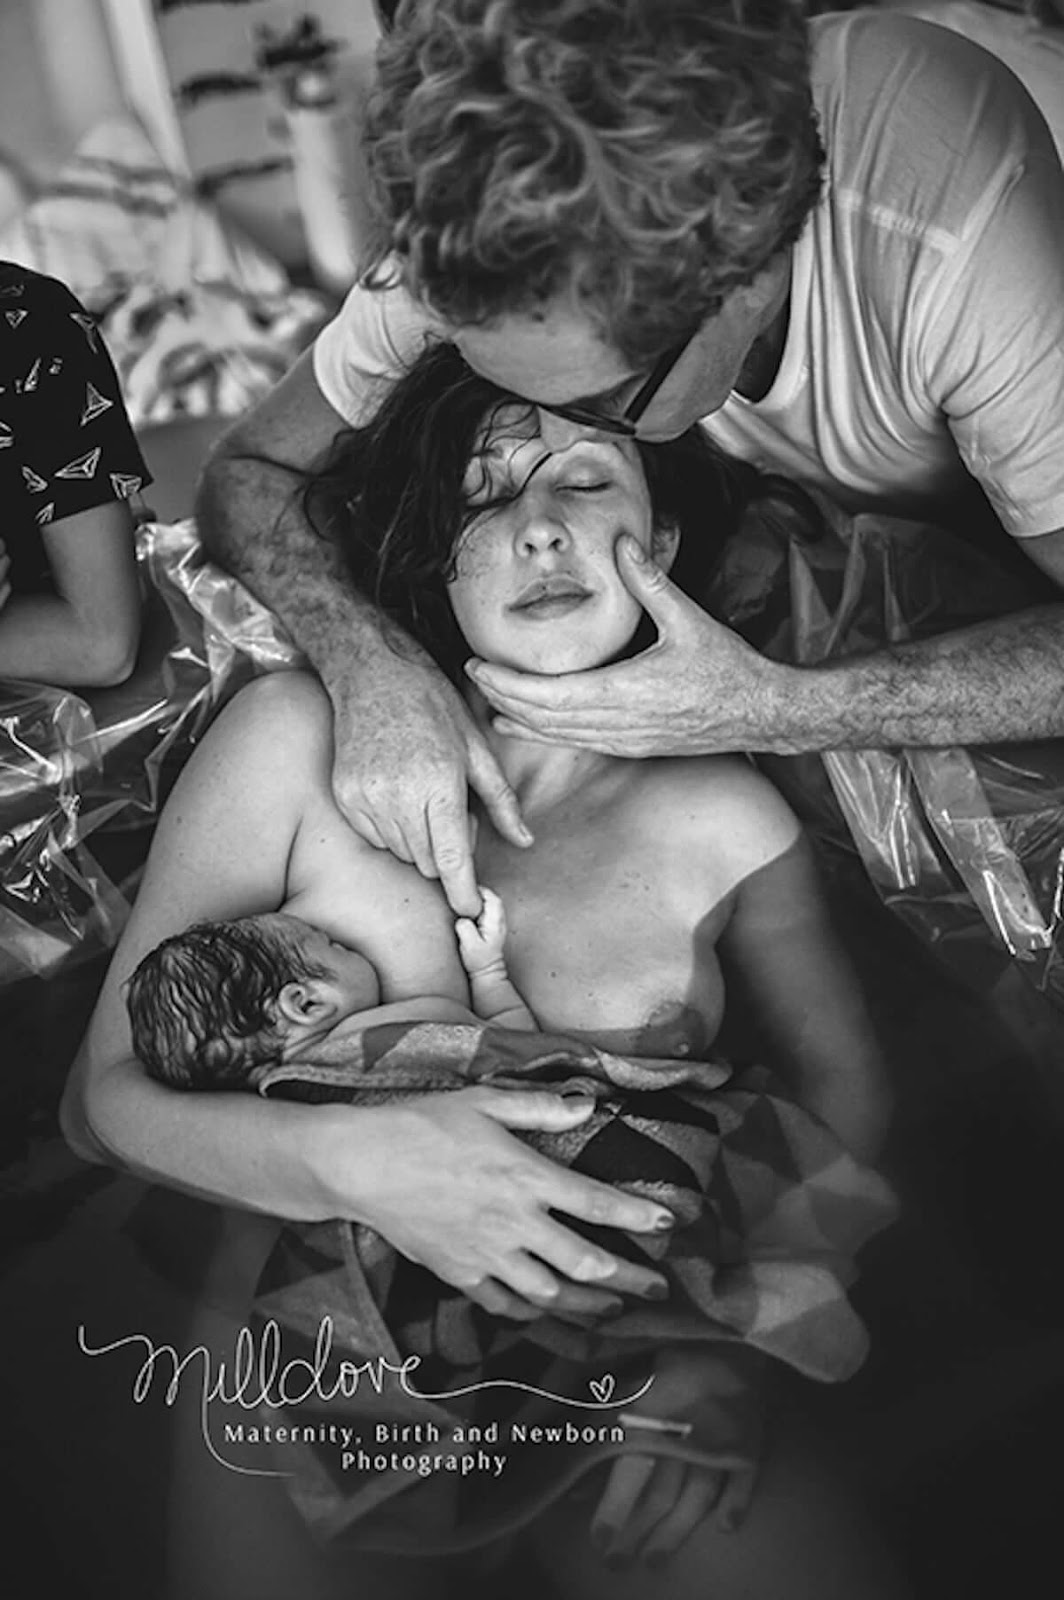 Mindblowing Images Of Childbirth From 2018 Winners Of Birth Photography Contest